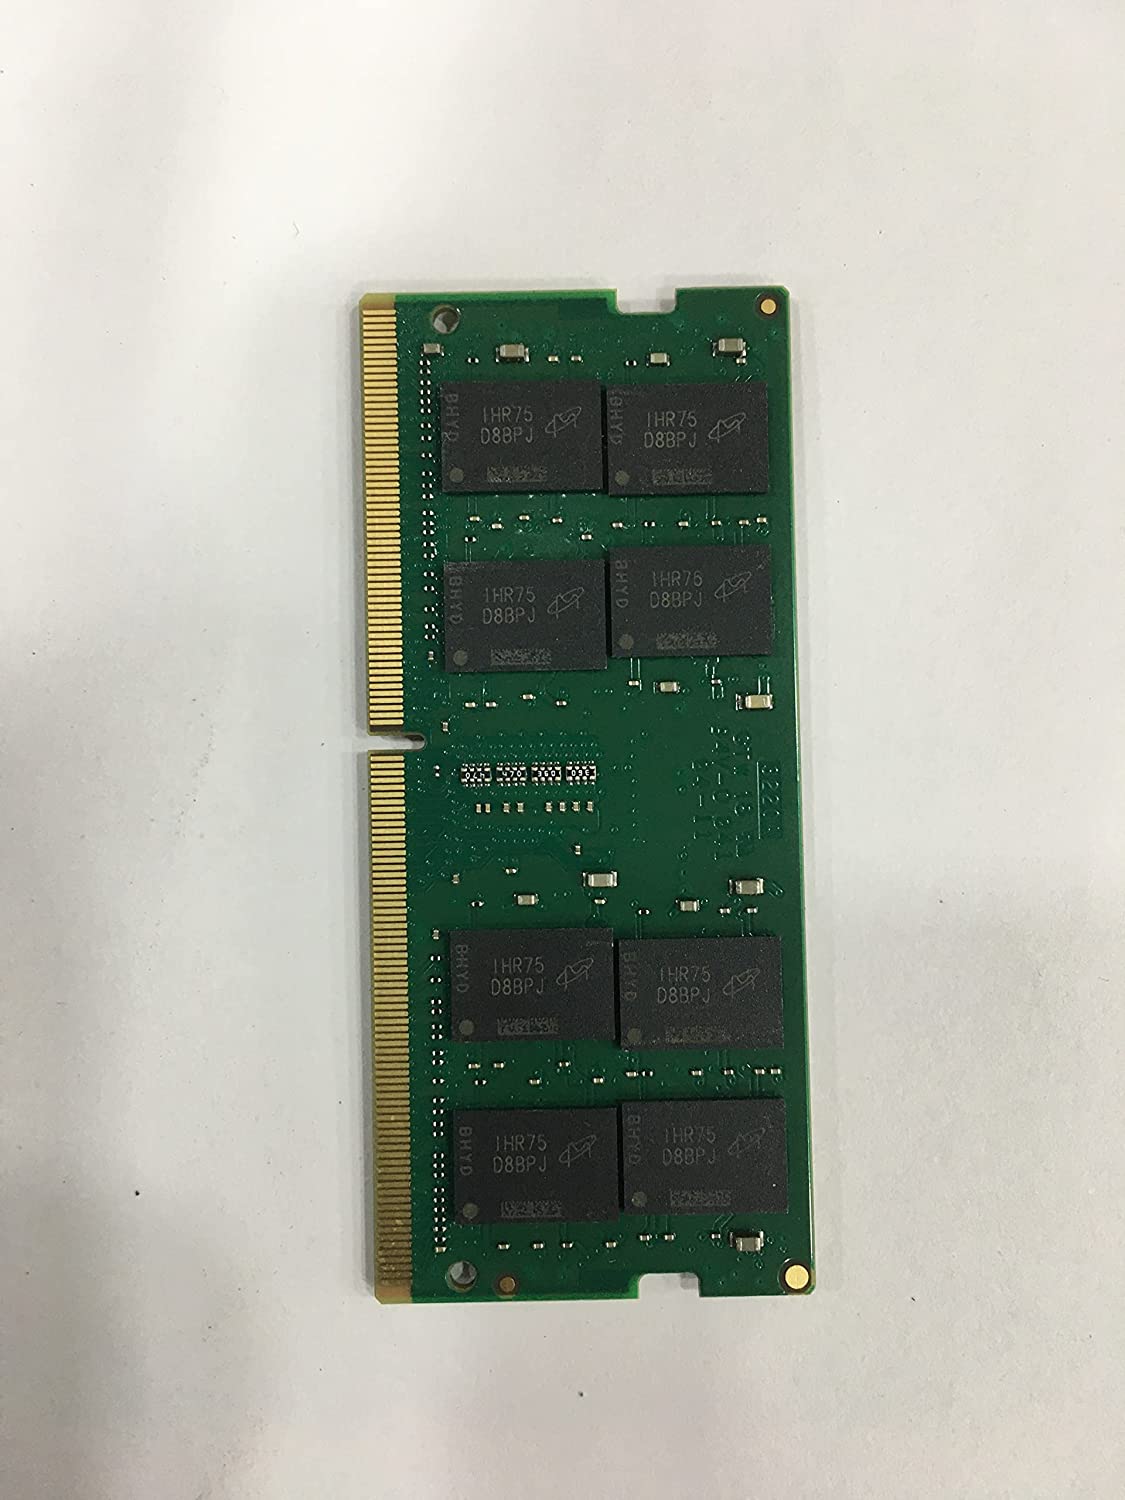 Crucial RAM 16GB DDR4 3200MHz CL22 (or 2933MHz or 2666MHz) Laptop Memory  CT16G4SFD832A